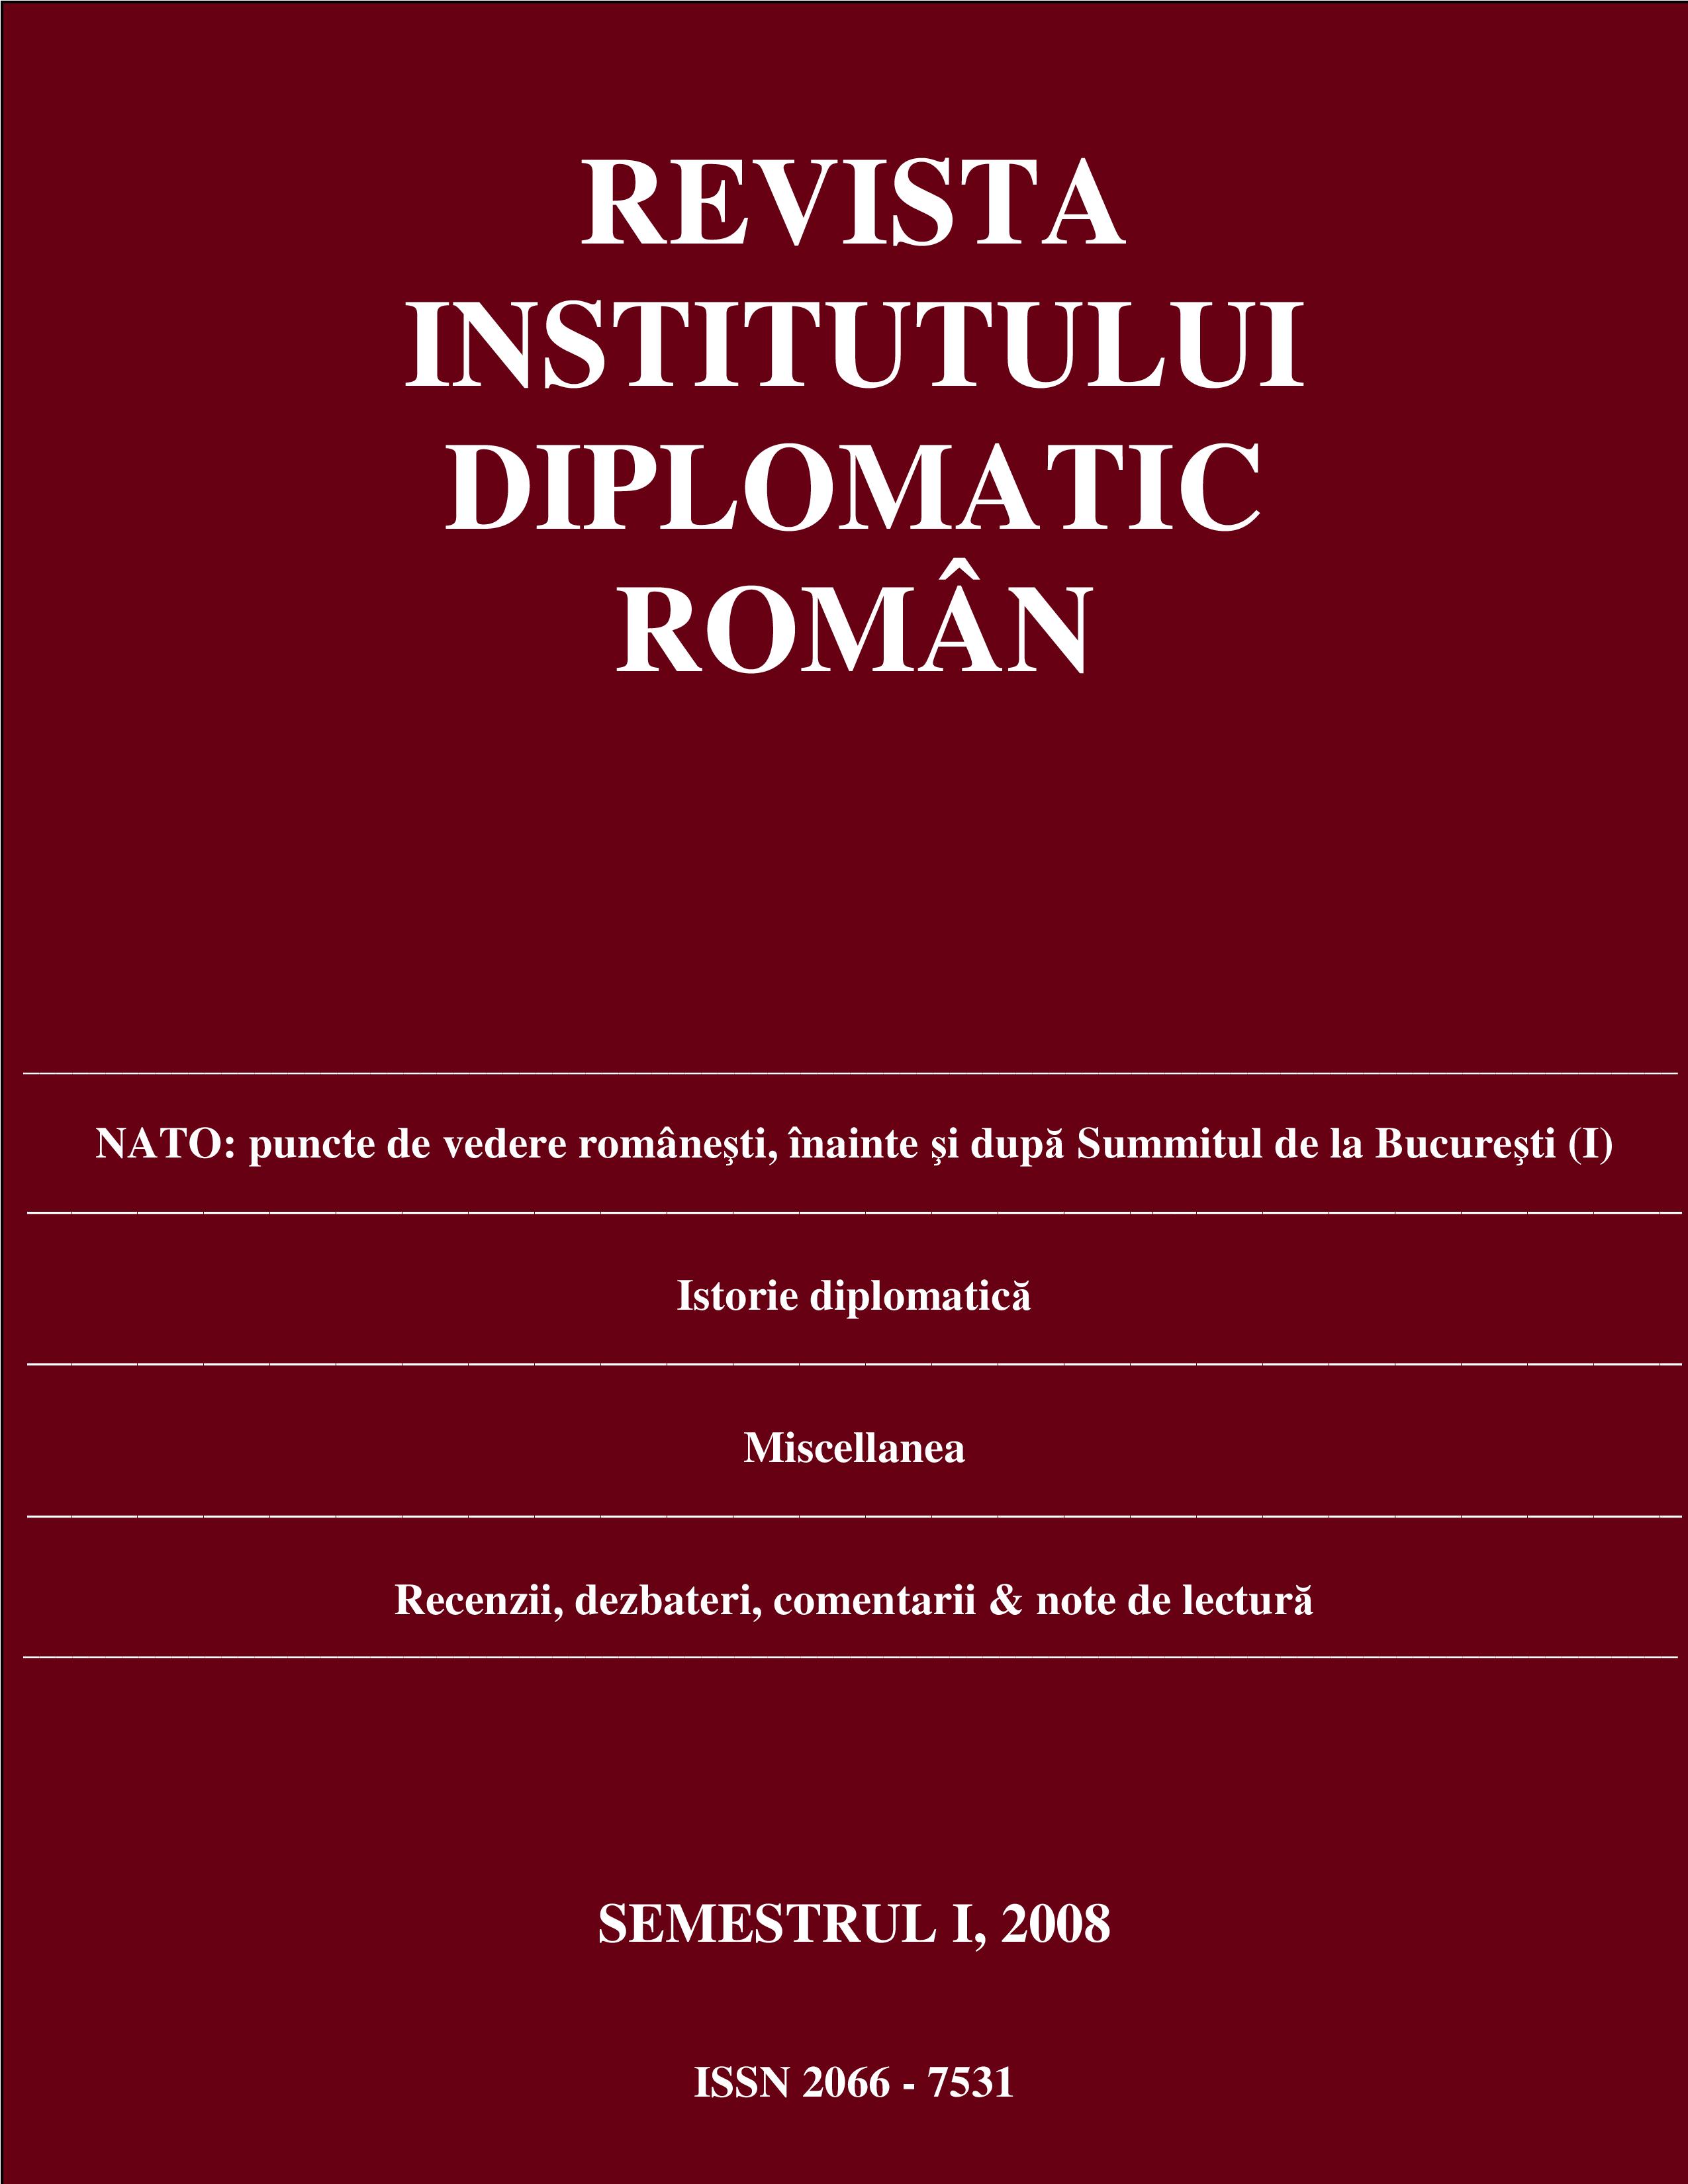 American-Romanian Relations and the Consolidation and Enlargement of NATO